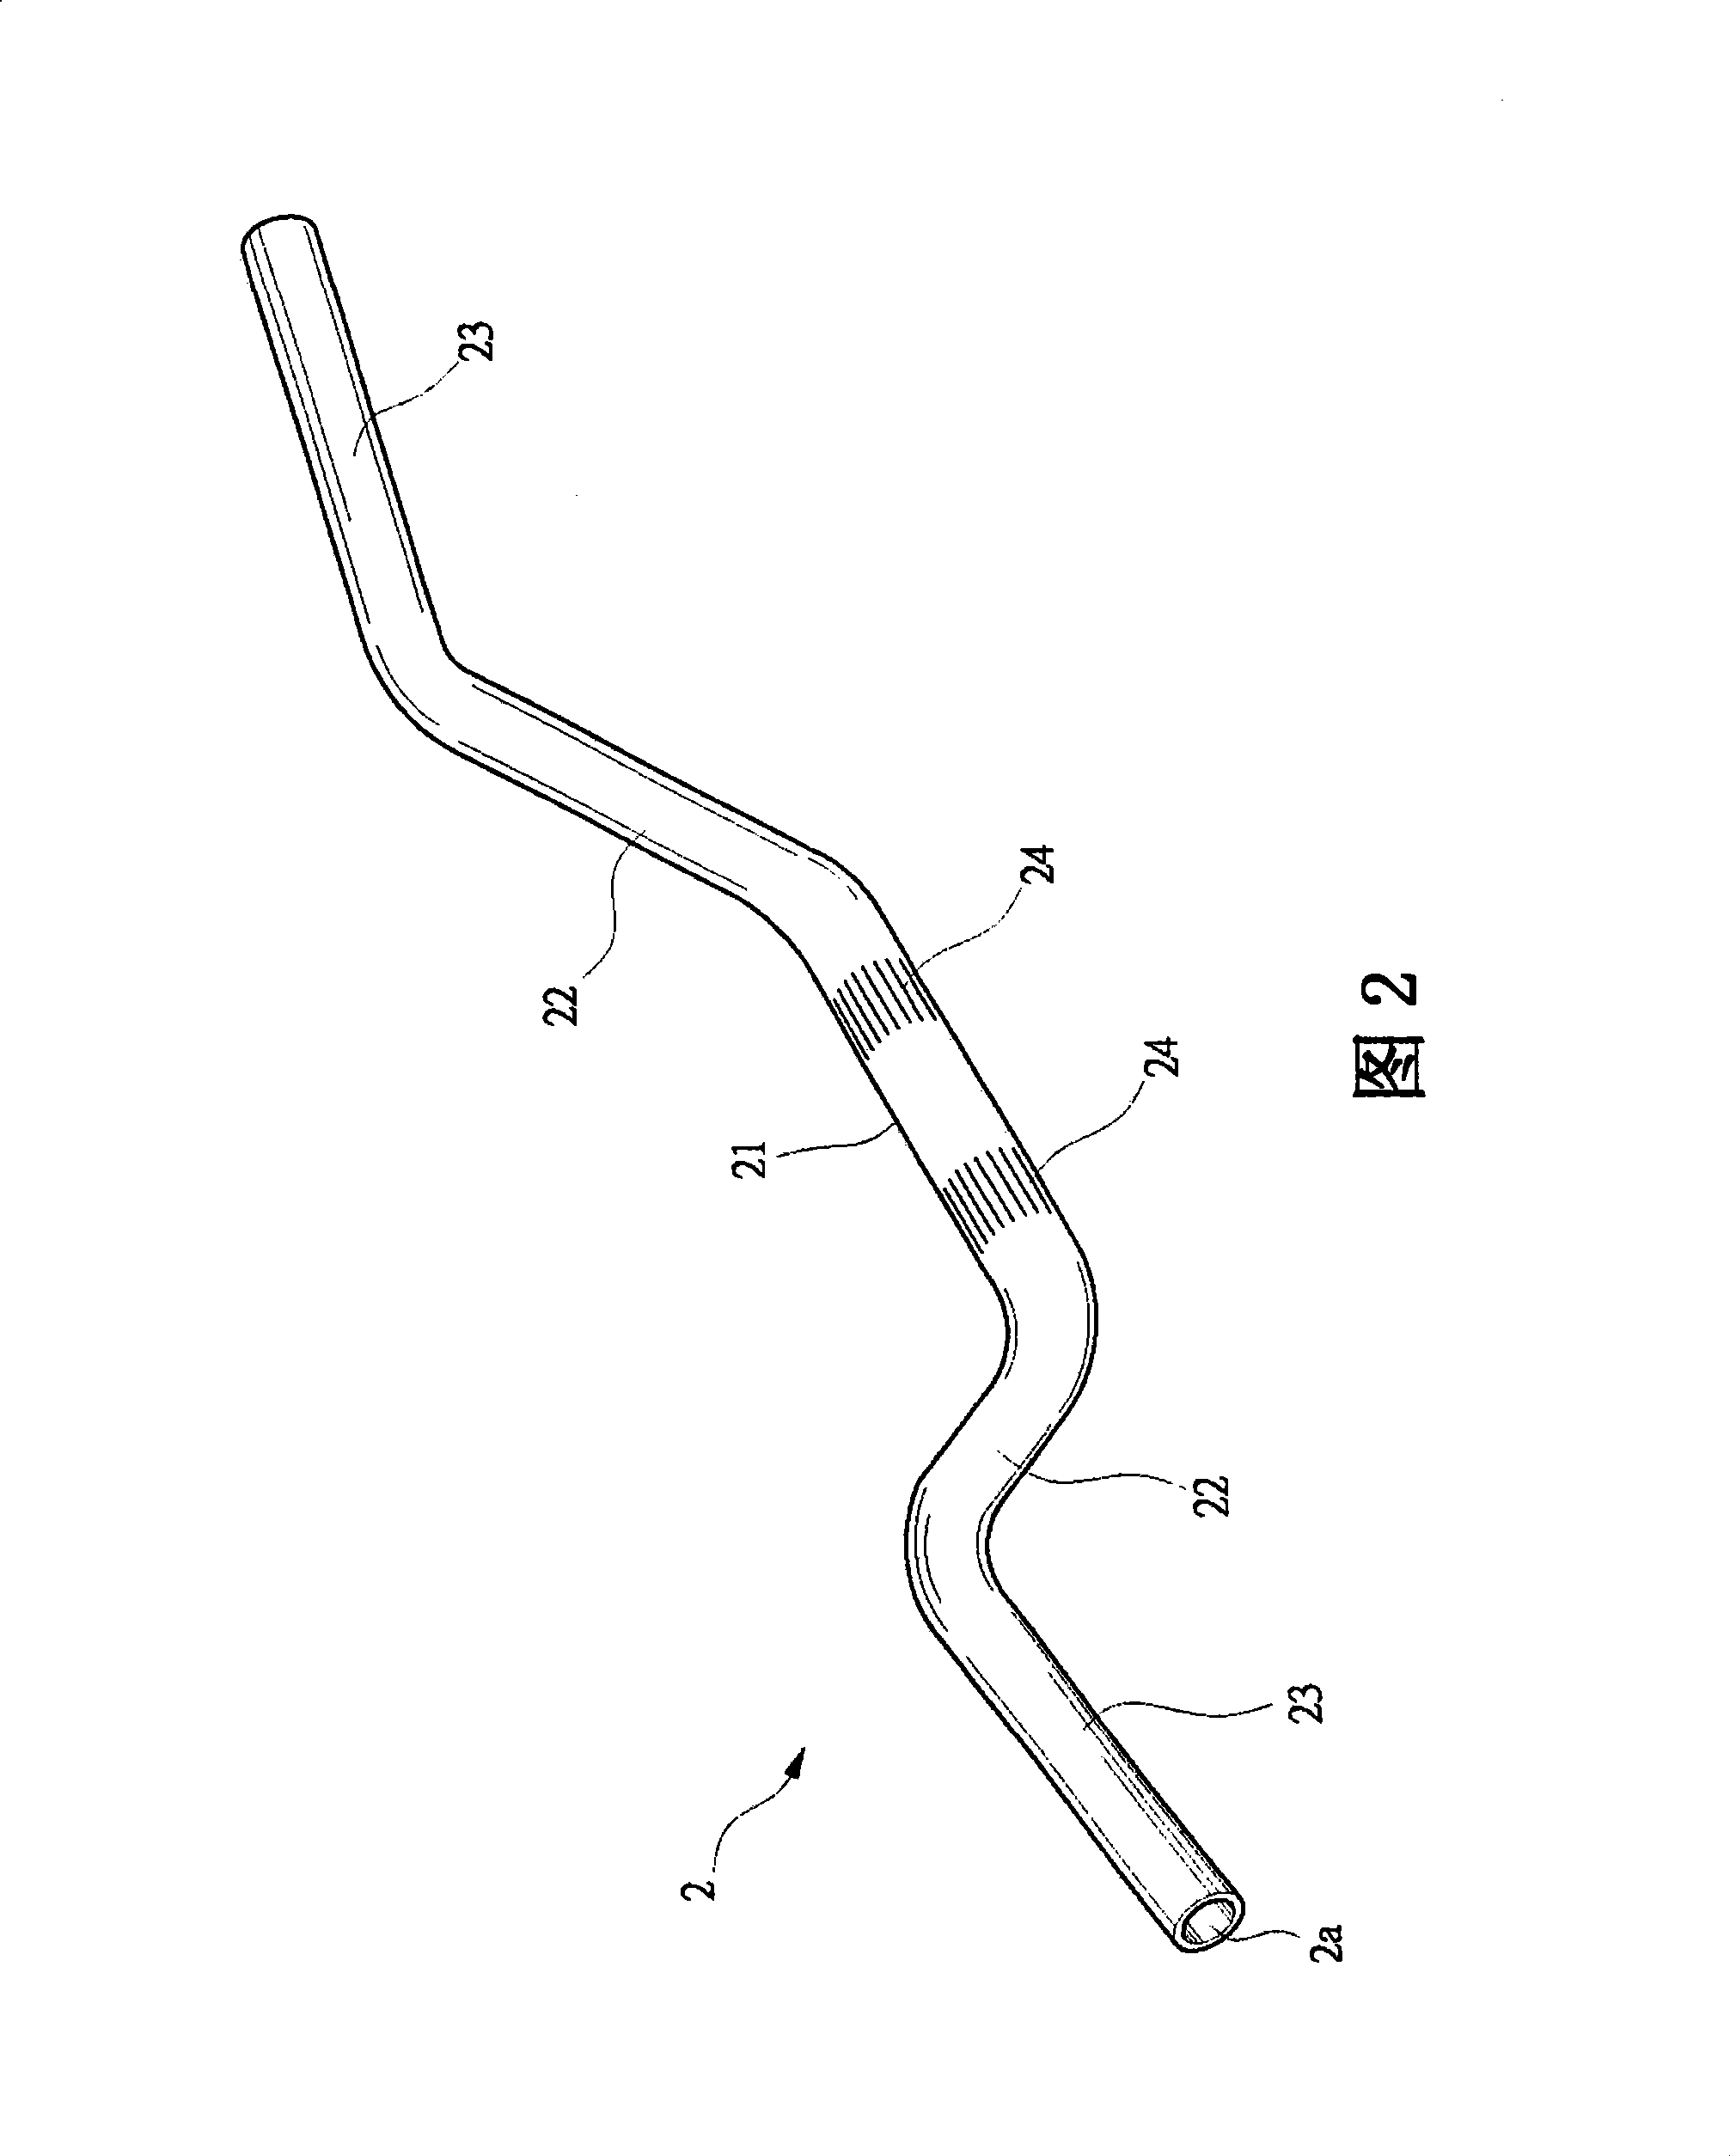 Vehicle steering handle structure